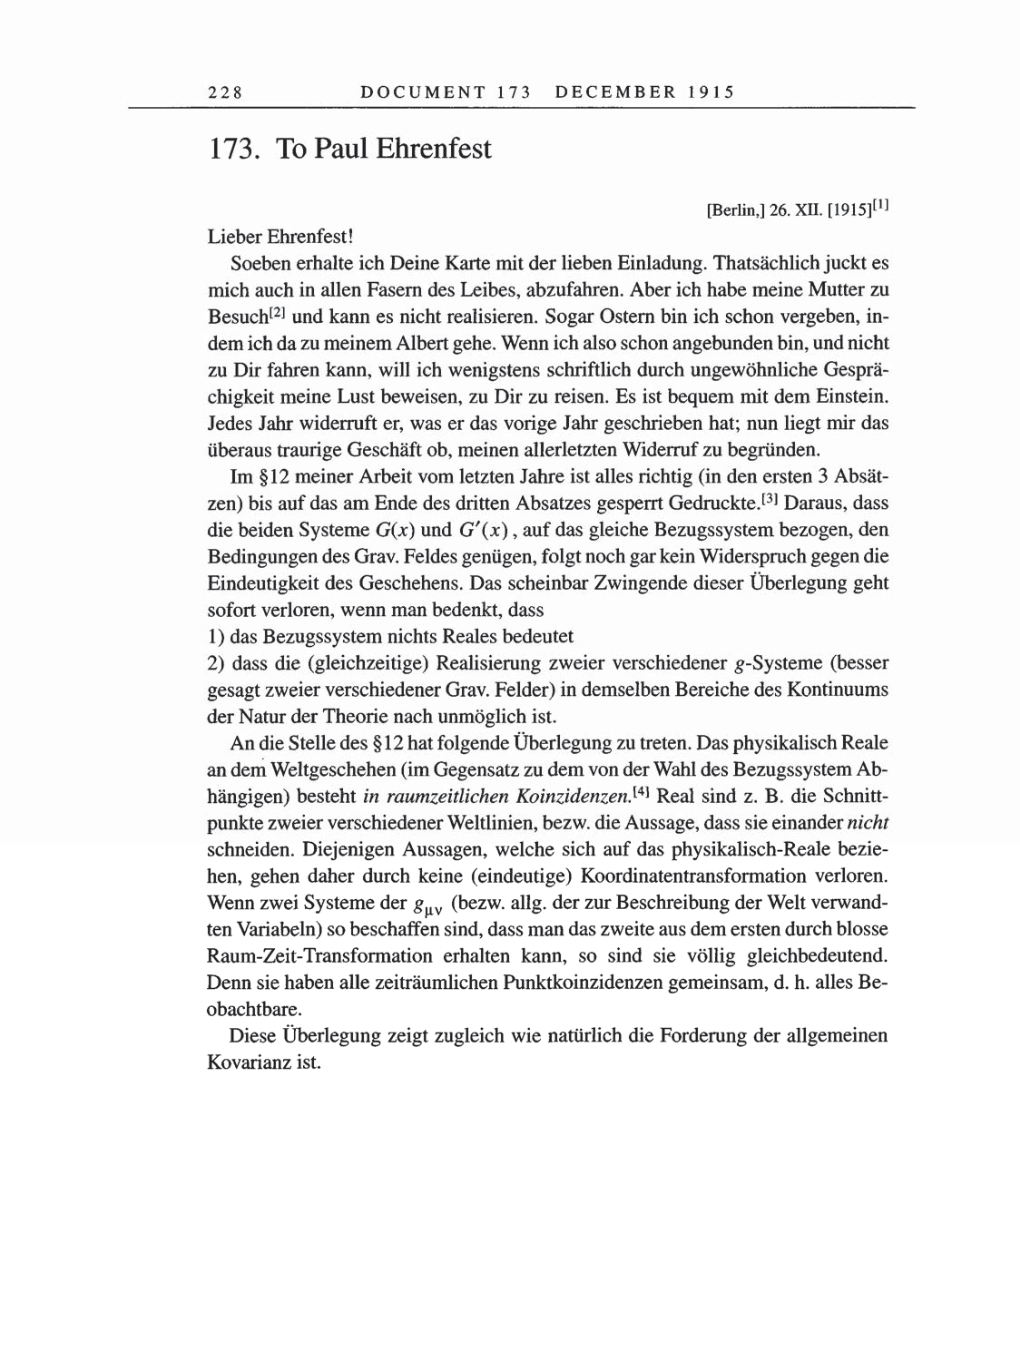 Volume 8, Part A: The Berlin Years: Correspondence 1914-1917 page 228